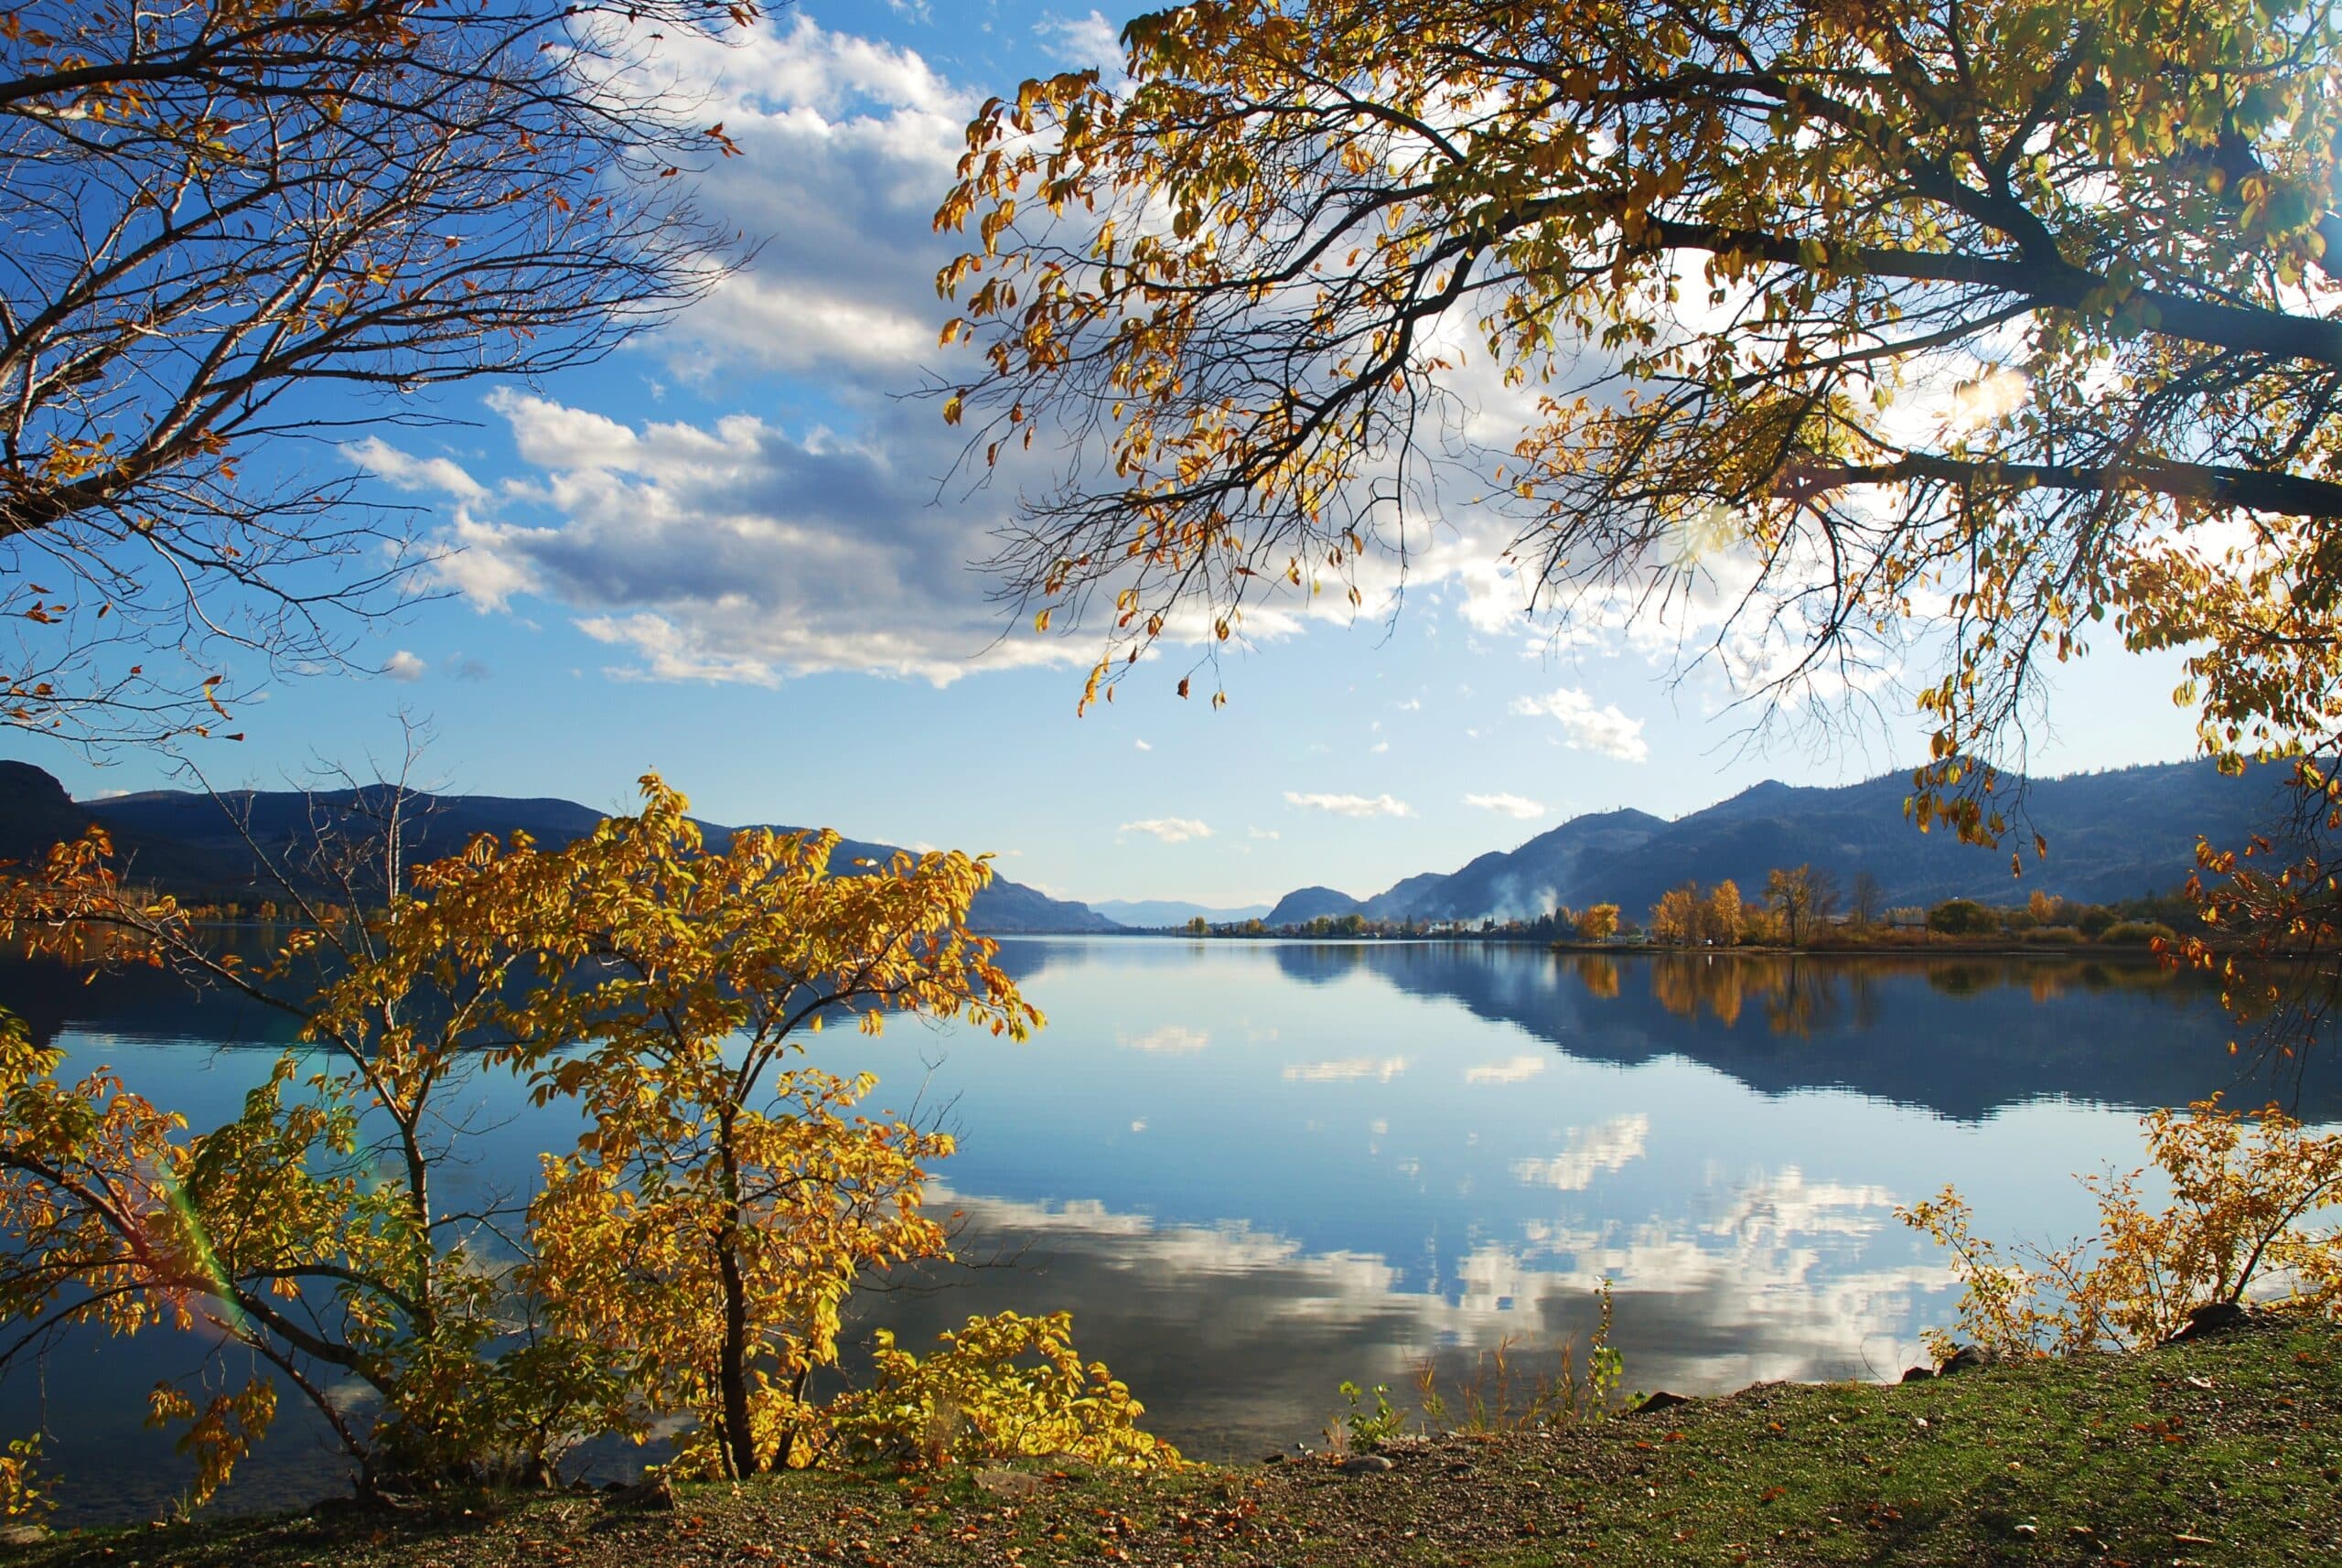 https://www.discovercanadatours.com/wp-content/uploads/2022/07/OSOYOOS-FALL-PHOTOS-HR-025-scaled.jpg